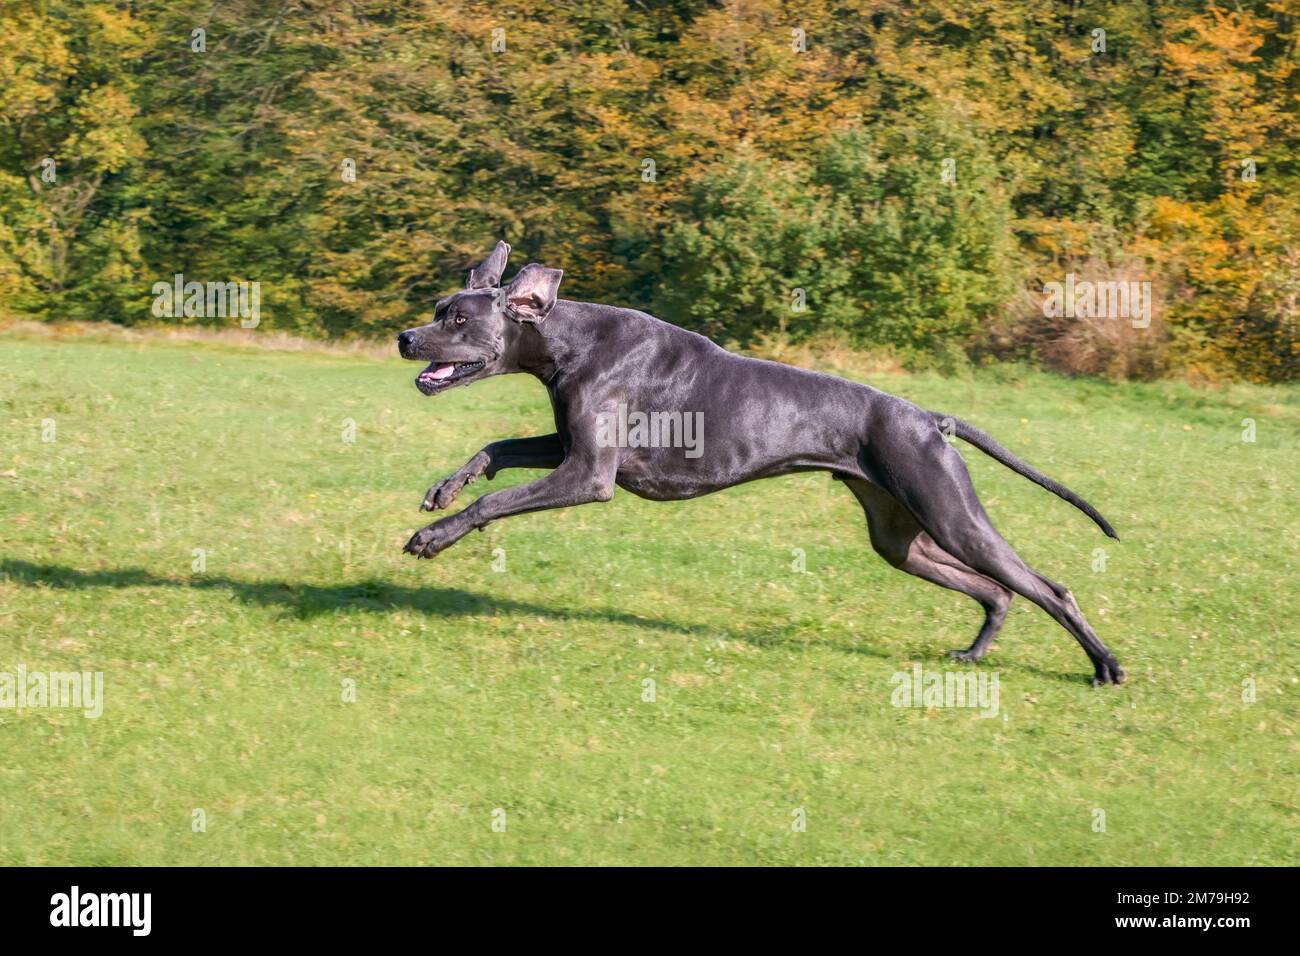 Blue Great Dane, one of the largest dog breeds, male, running playfully and powerfully across a green grass meadow in autumn, Germany Stock Photo